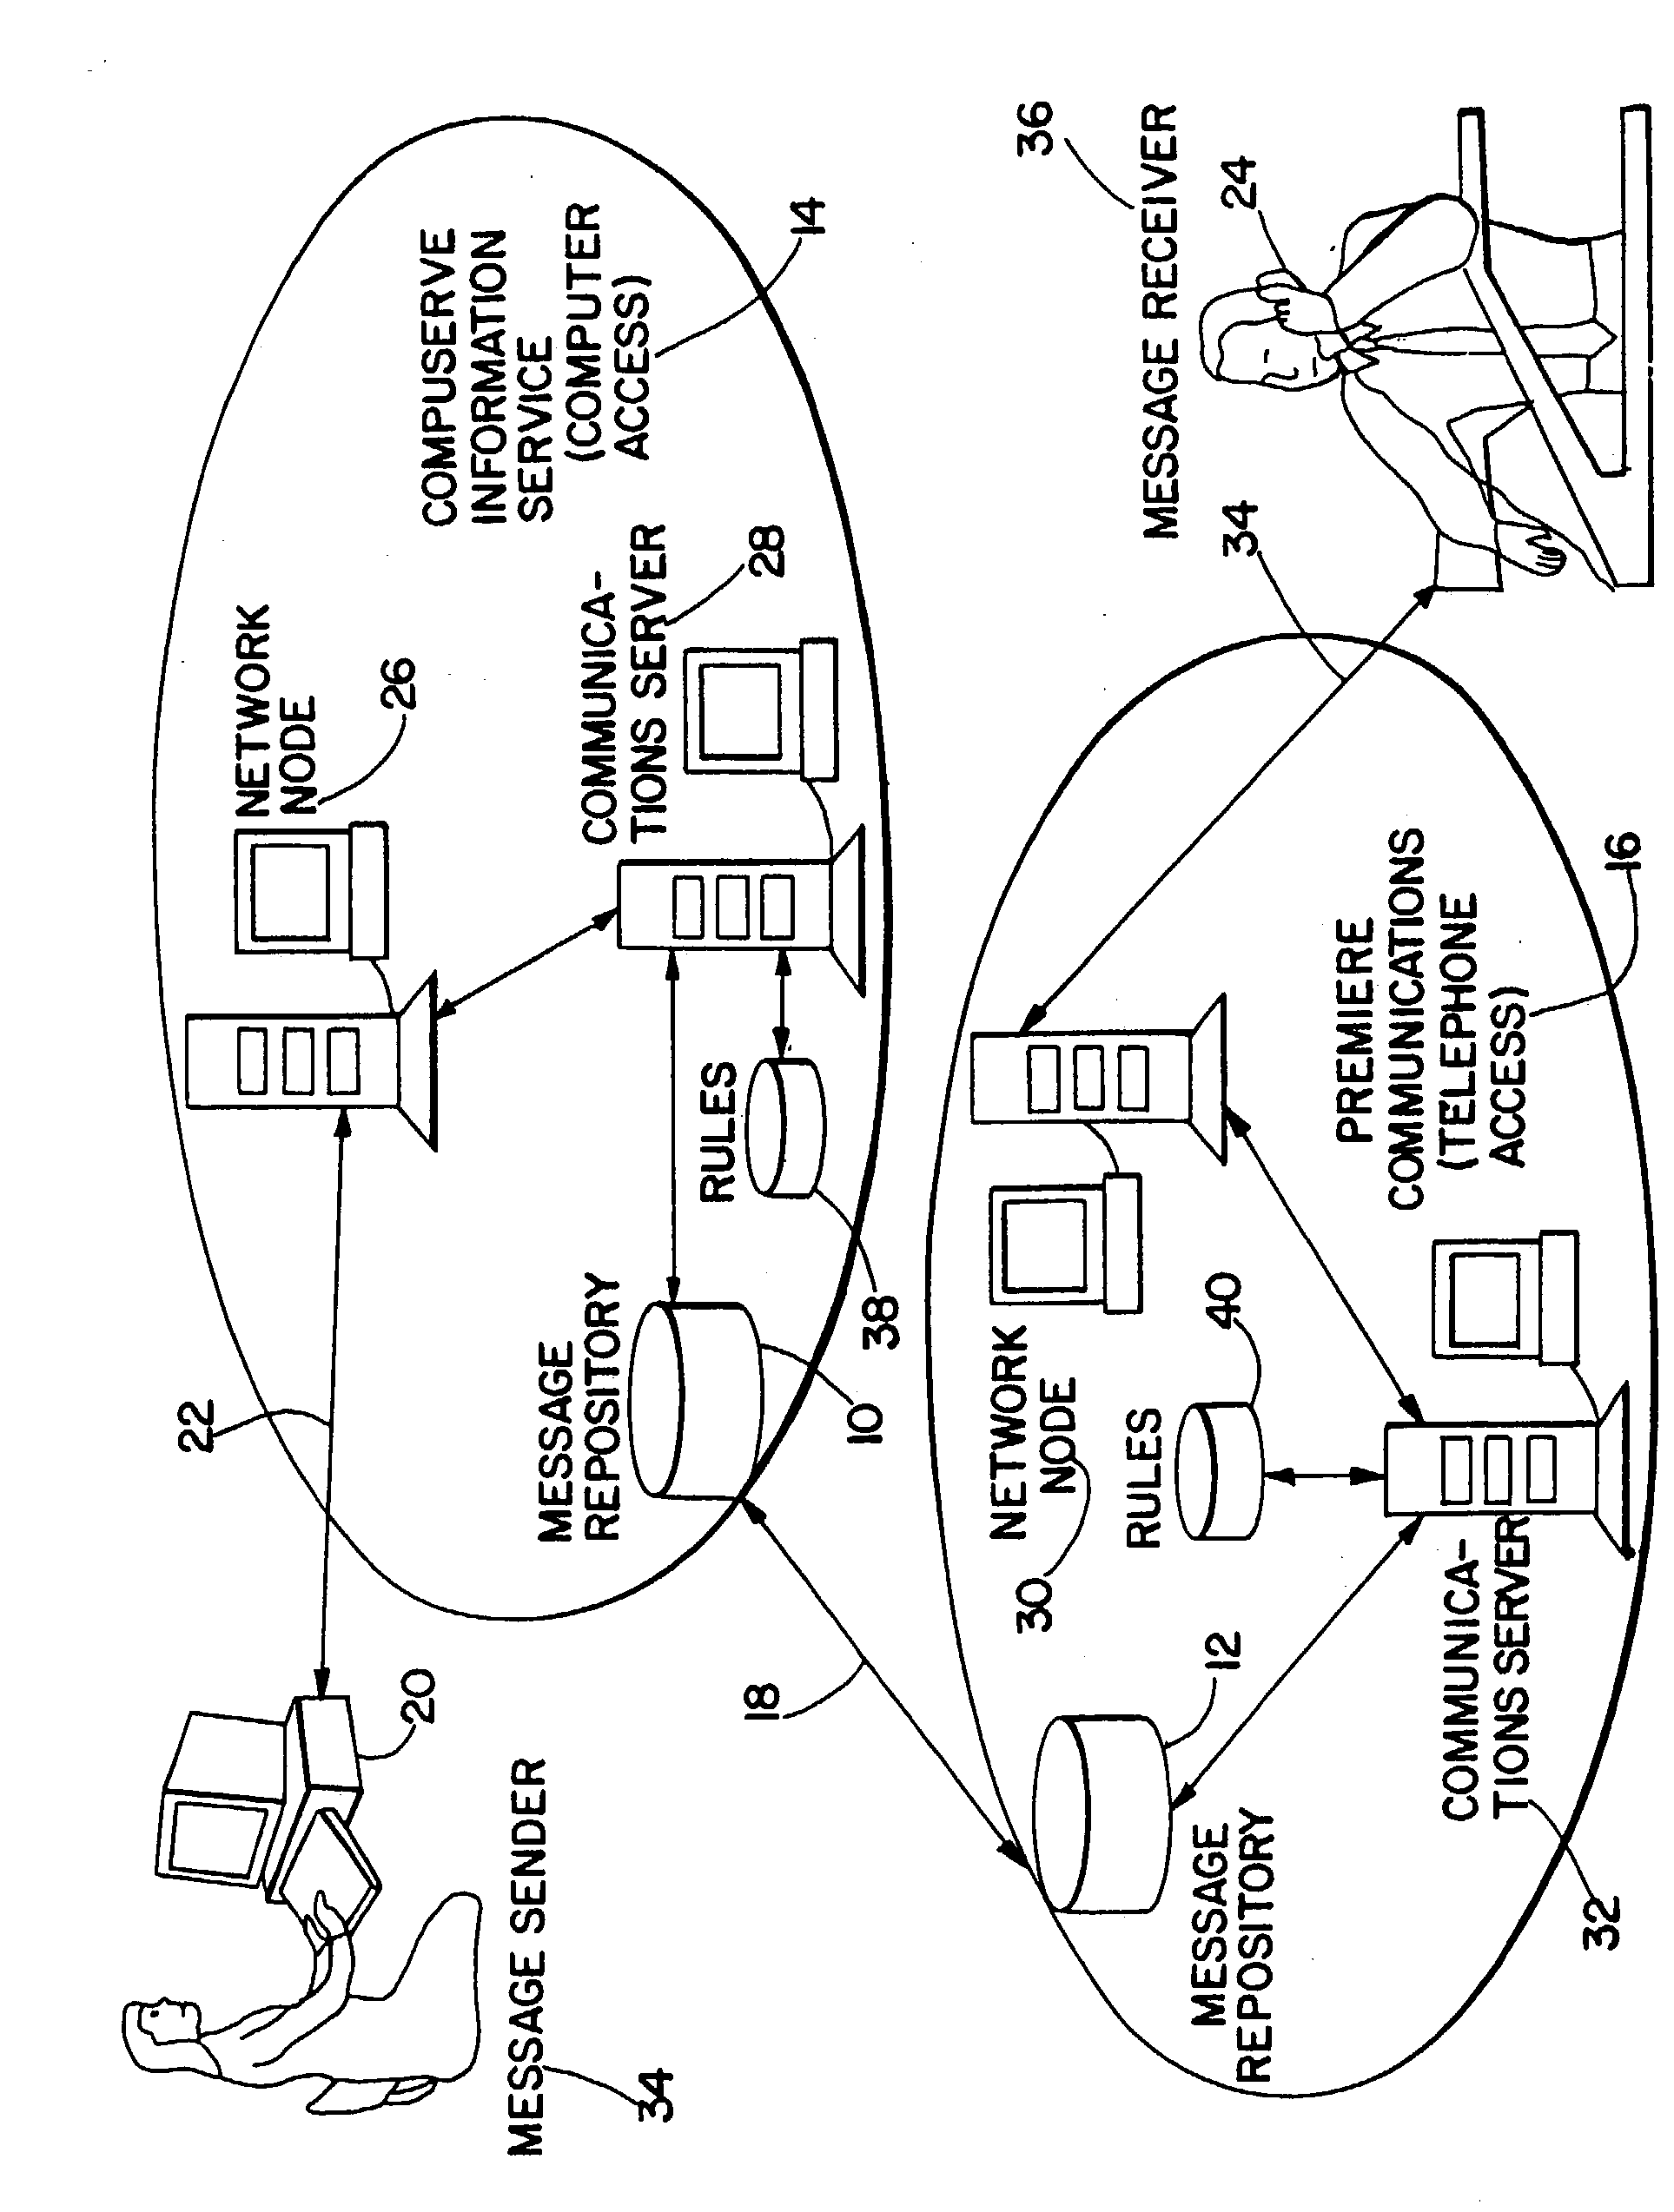 System for integrated electronic communications